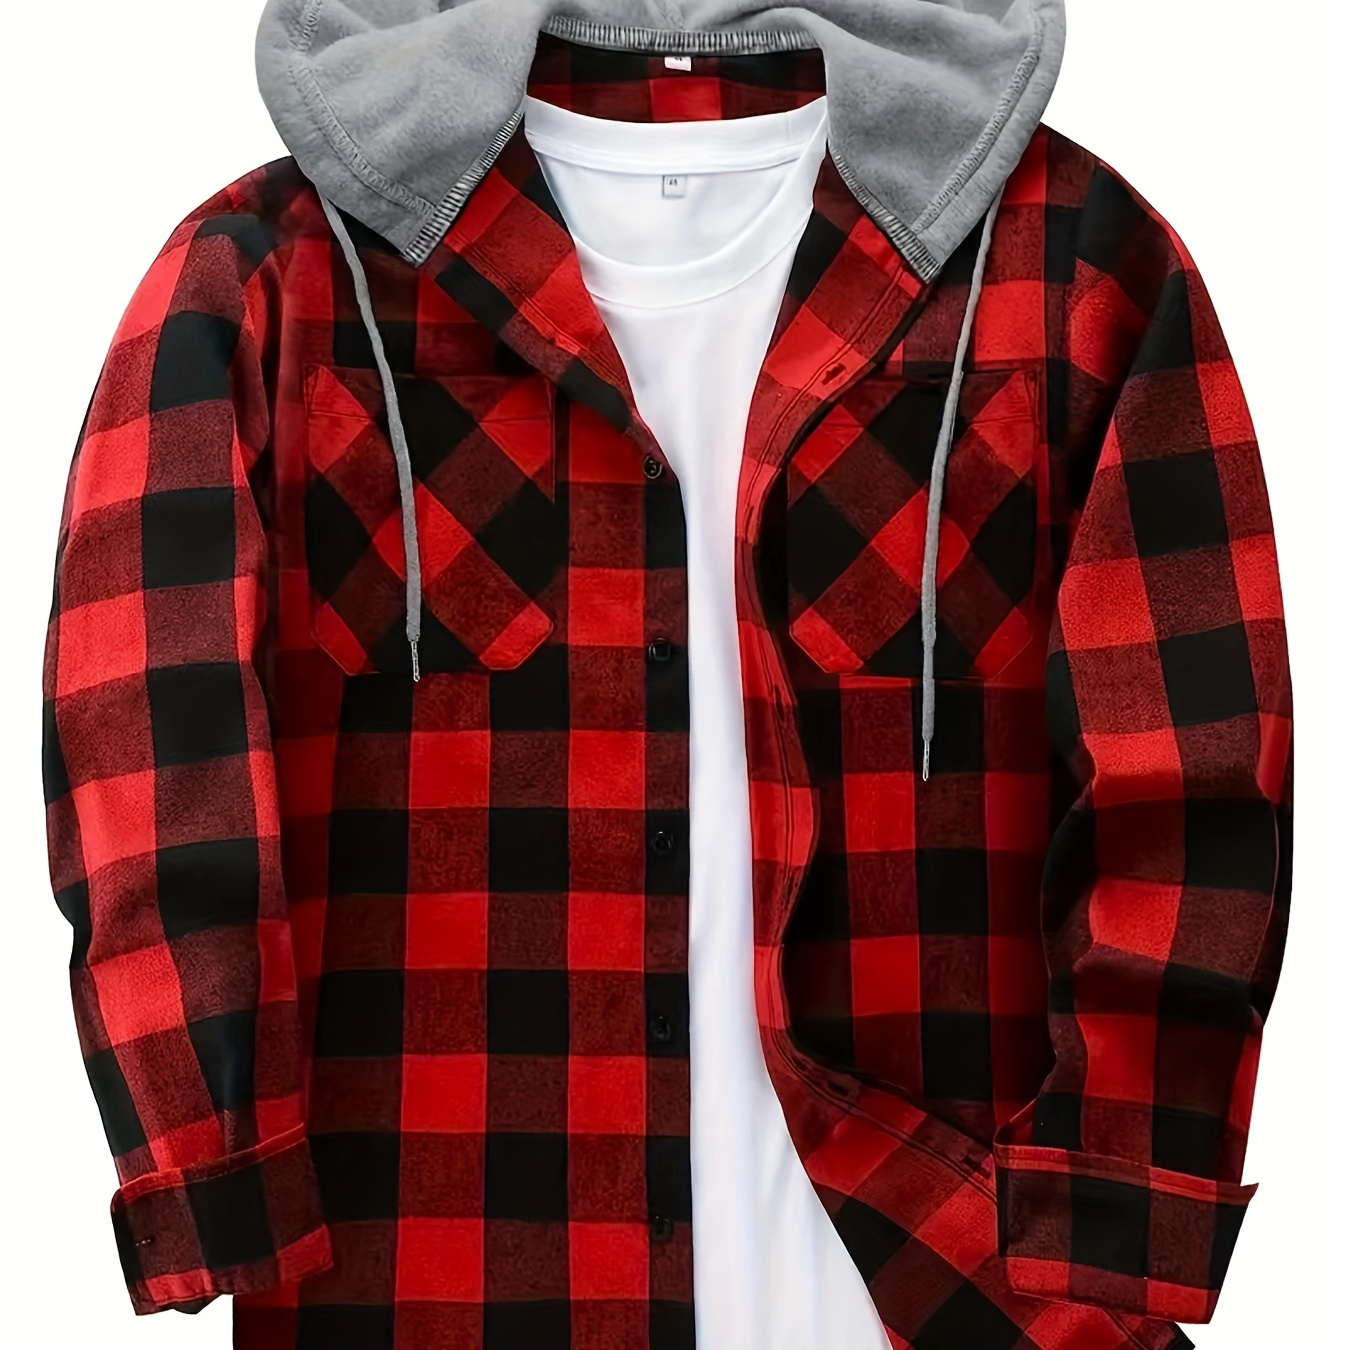 

Classic Design Plaid Shirt Coat For Men Long Sleeve Casual Regular Fit Button Up Hooded Shirts Jacket